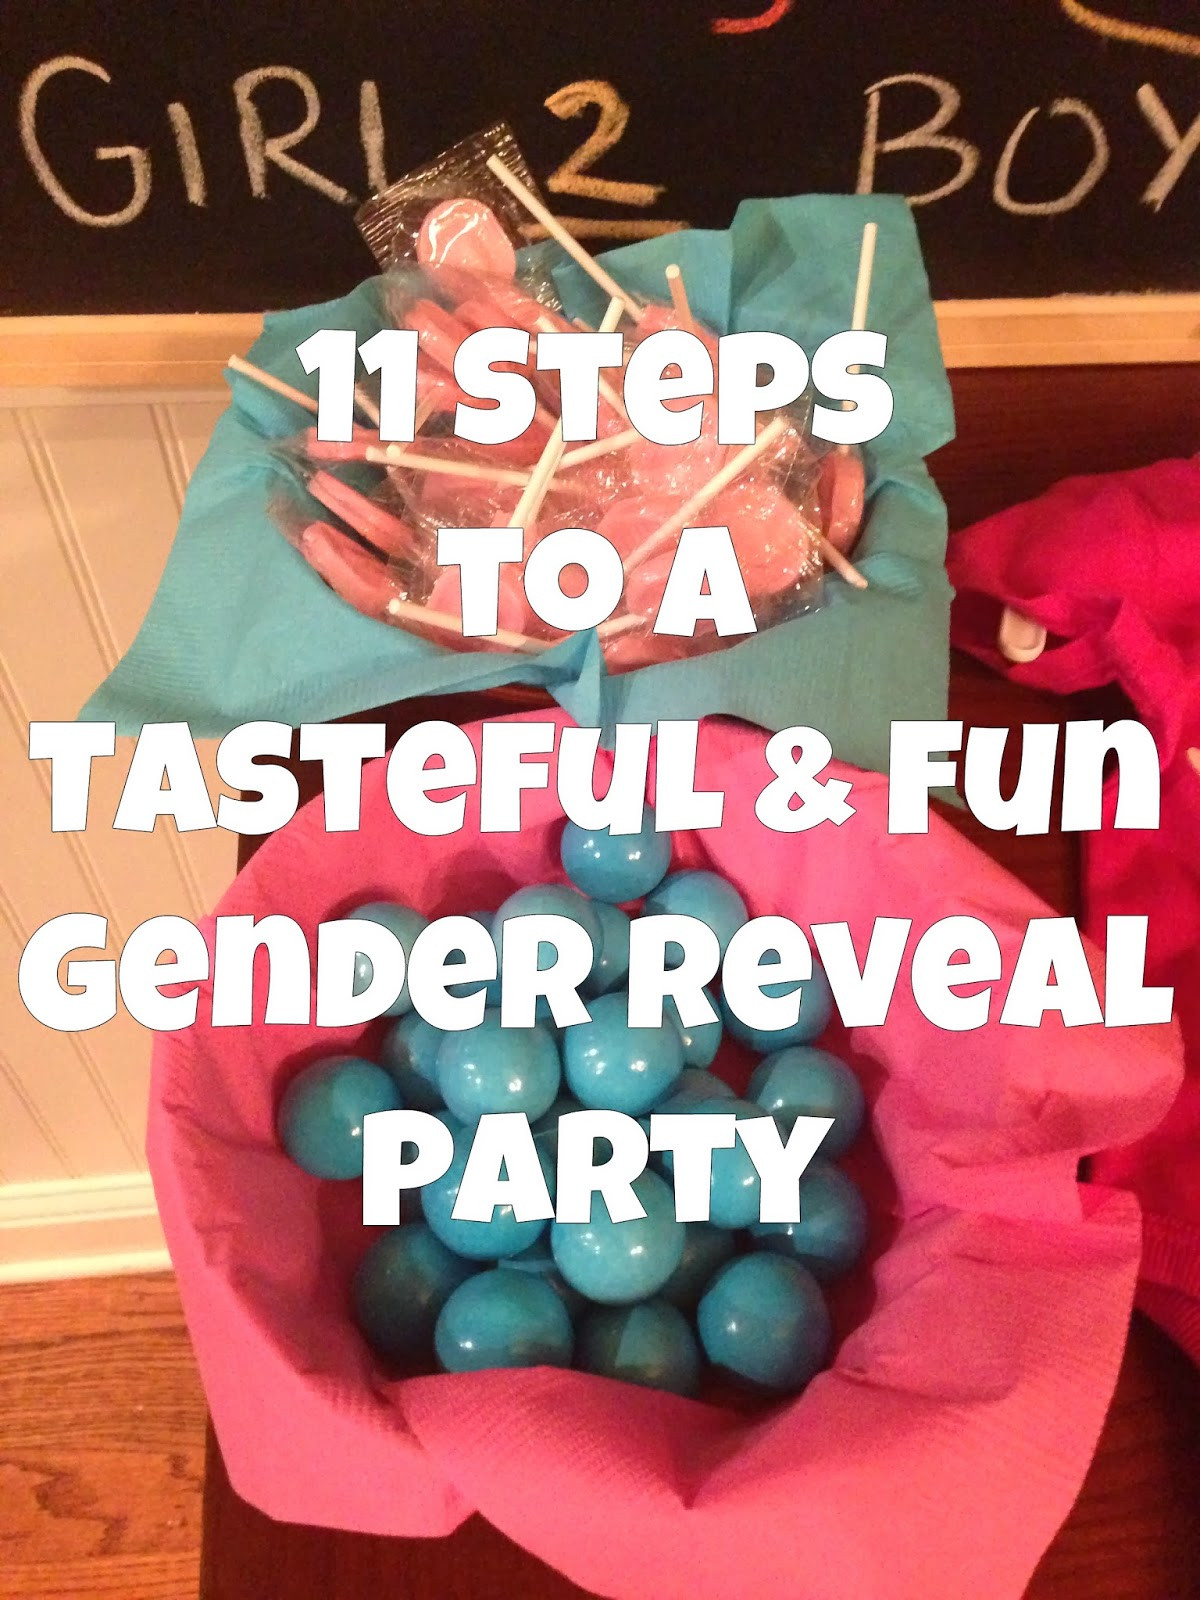 Good Ideas For A Gender Reveal Party
 Mother to Kings 11 Steps to a Tasteful & Fun Gender